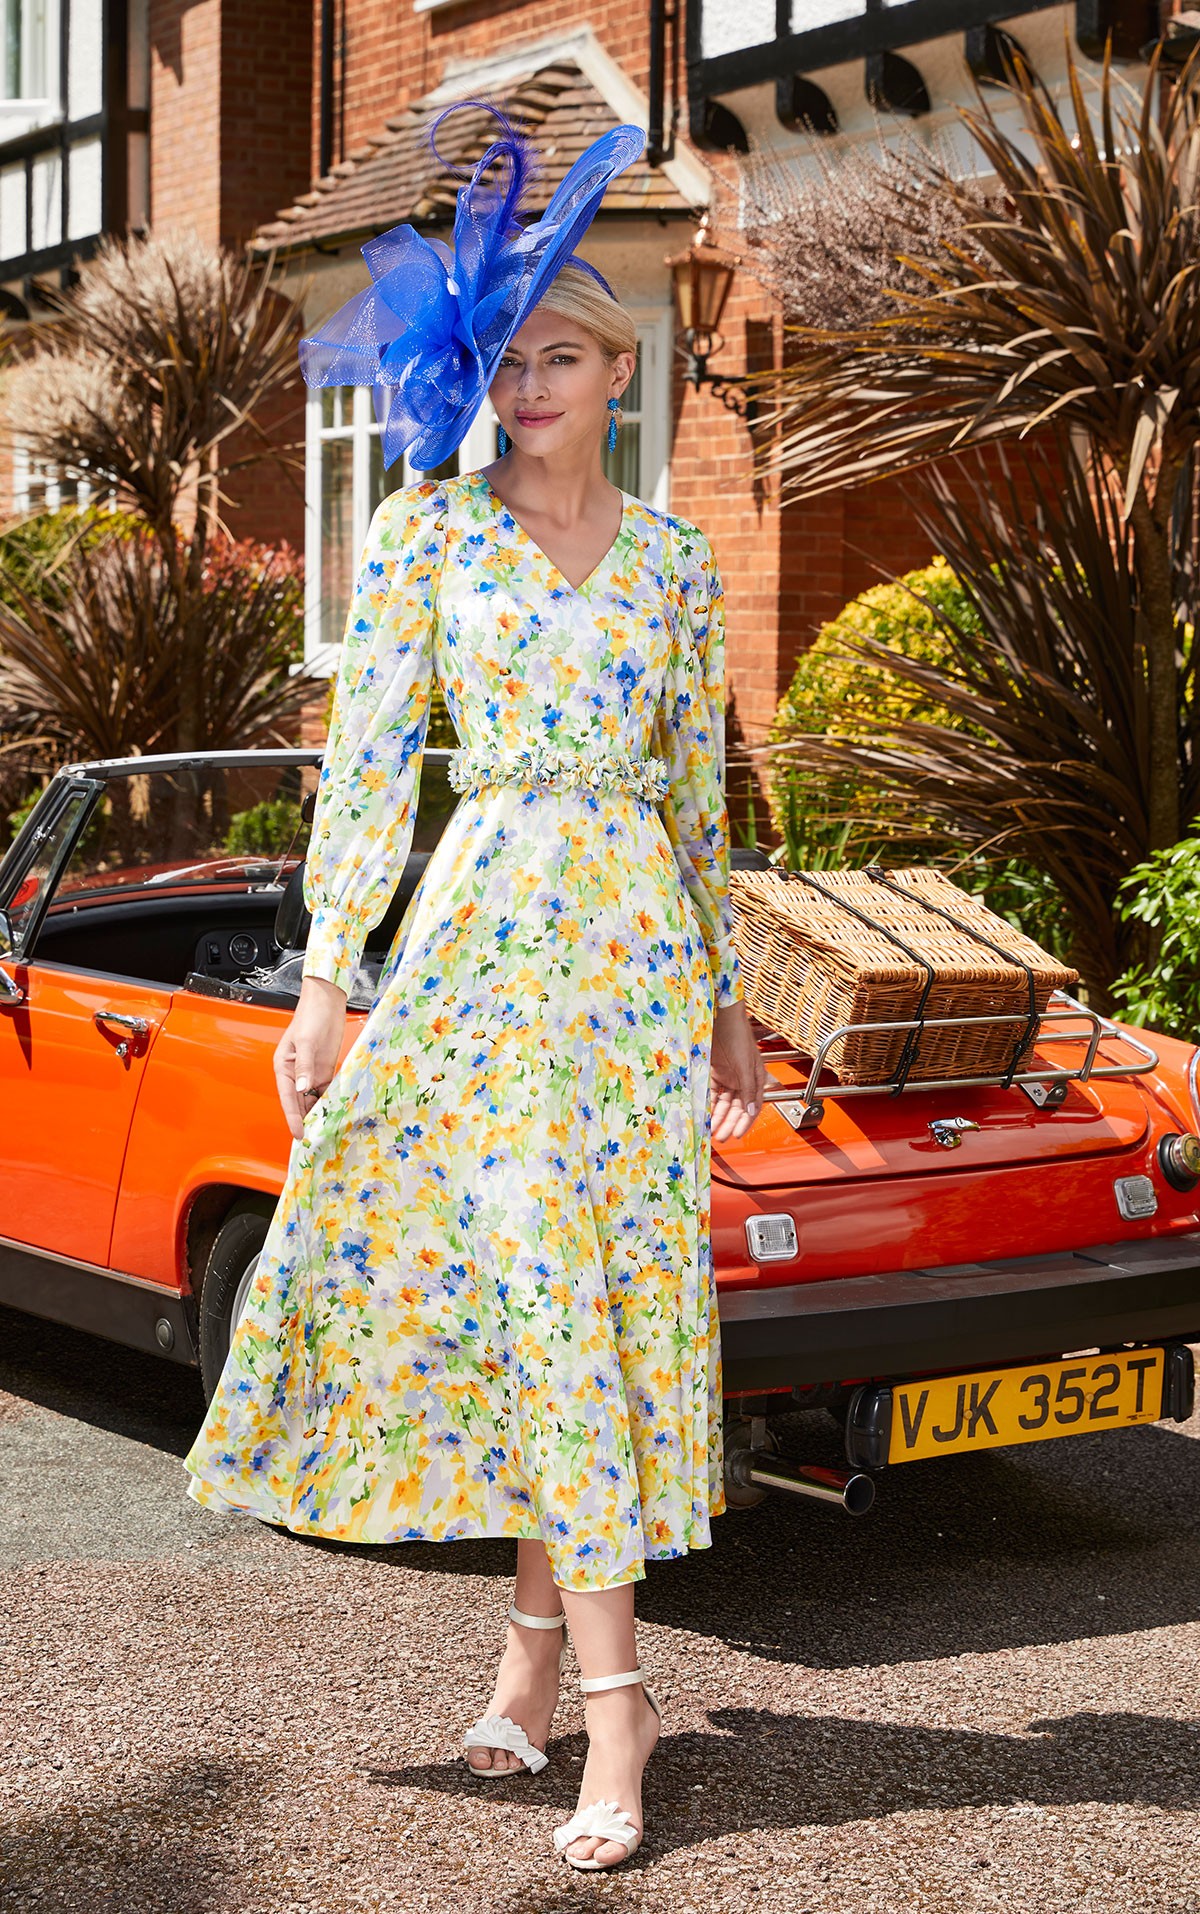 Veni Infantino- 29679 size 6, 18 - Veni Infantino Invitations Collection 29679 - Long Floral print dress with sleeves - Spring Summer Mother of the Bride dresses Now on sale at Occasions at Blessings Loyal Parade, Mill Rise, Westdene, Brighton. BN1 5GG T: 01273 505766 E: info@blessingsbridal.co.uk